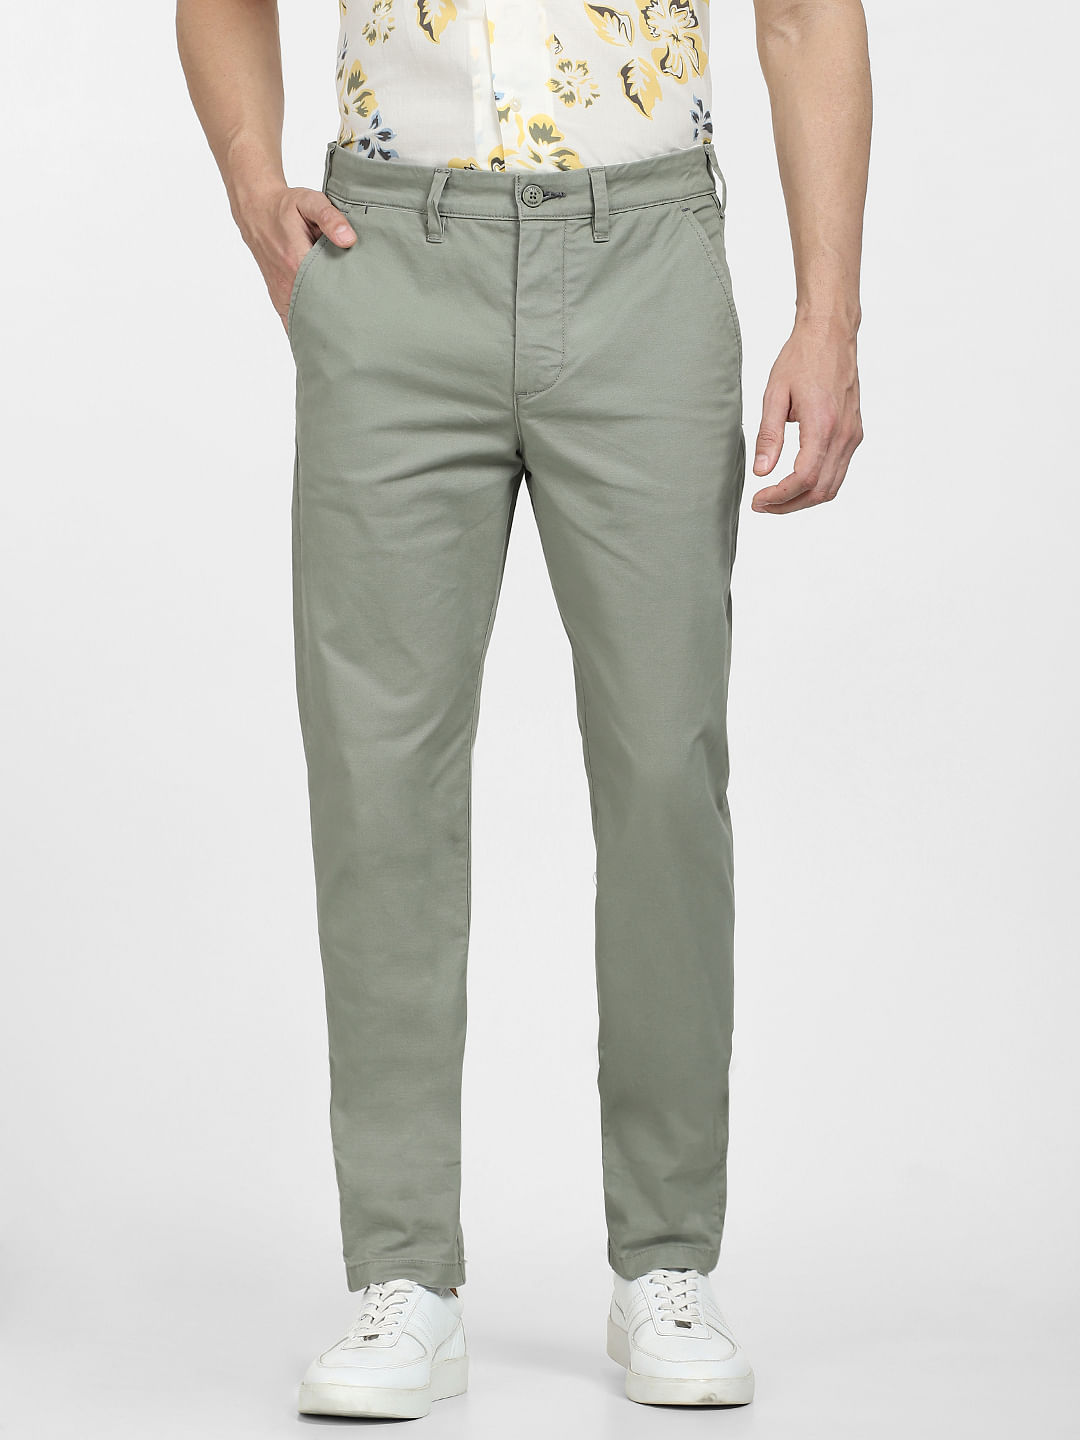 Buy WHITE Trousers & Pants for Men by Rare Rabbit Online | Ajio.com